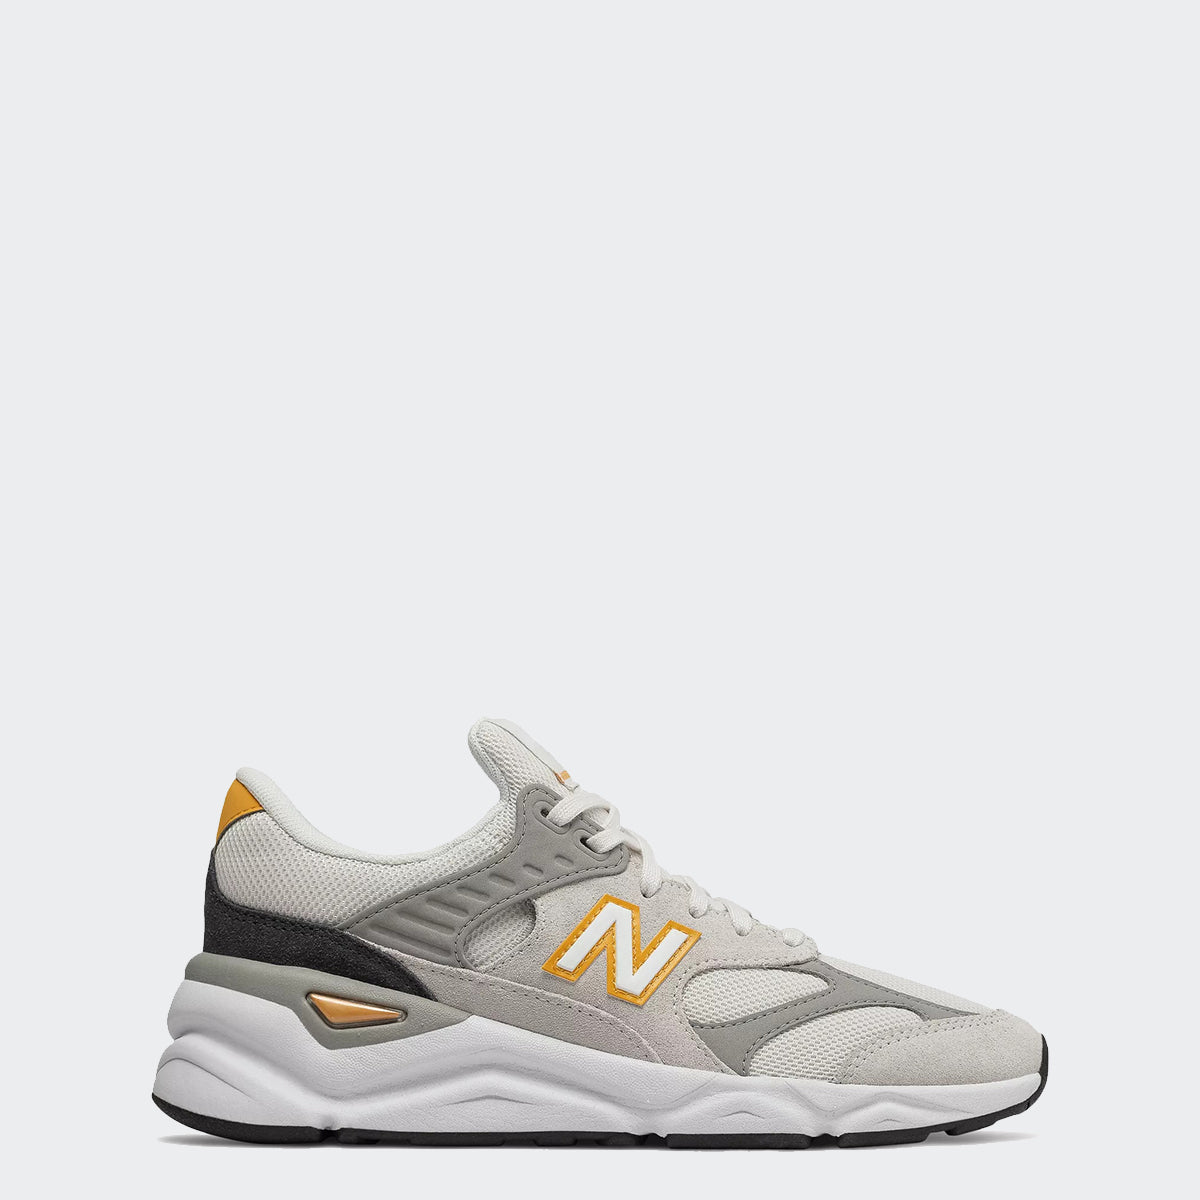 new balance x9 reconstructed